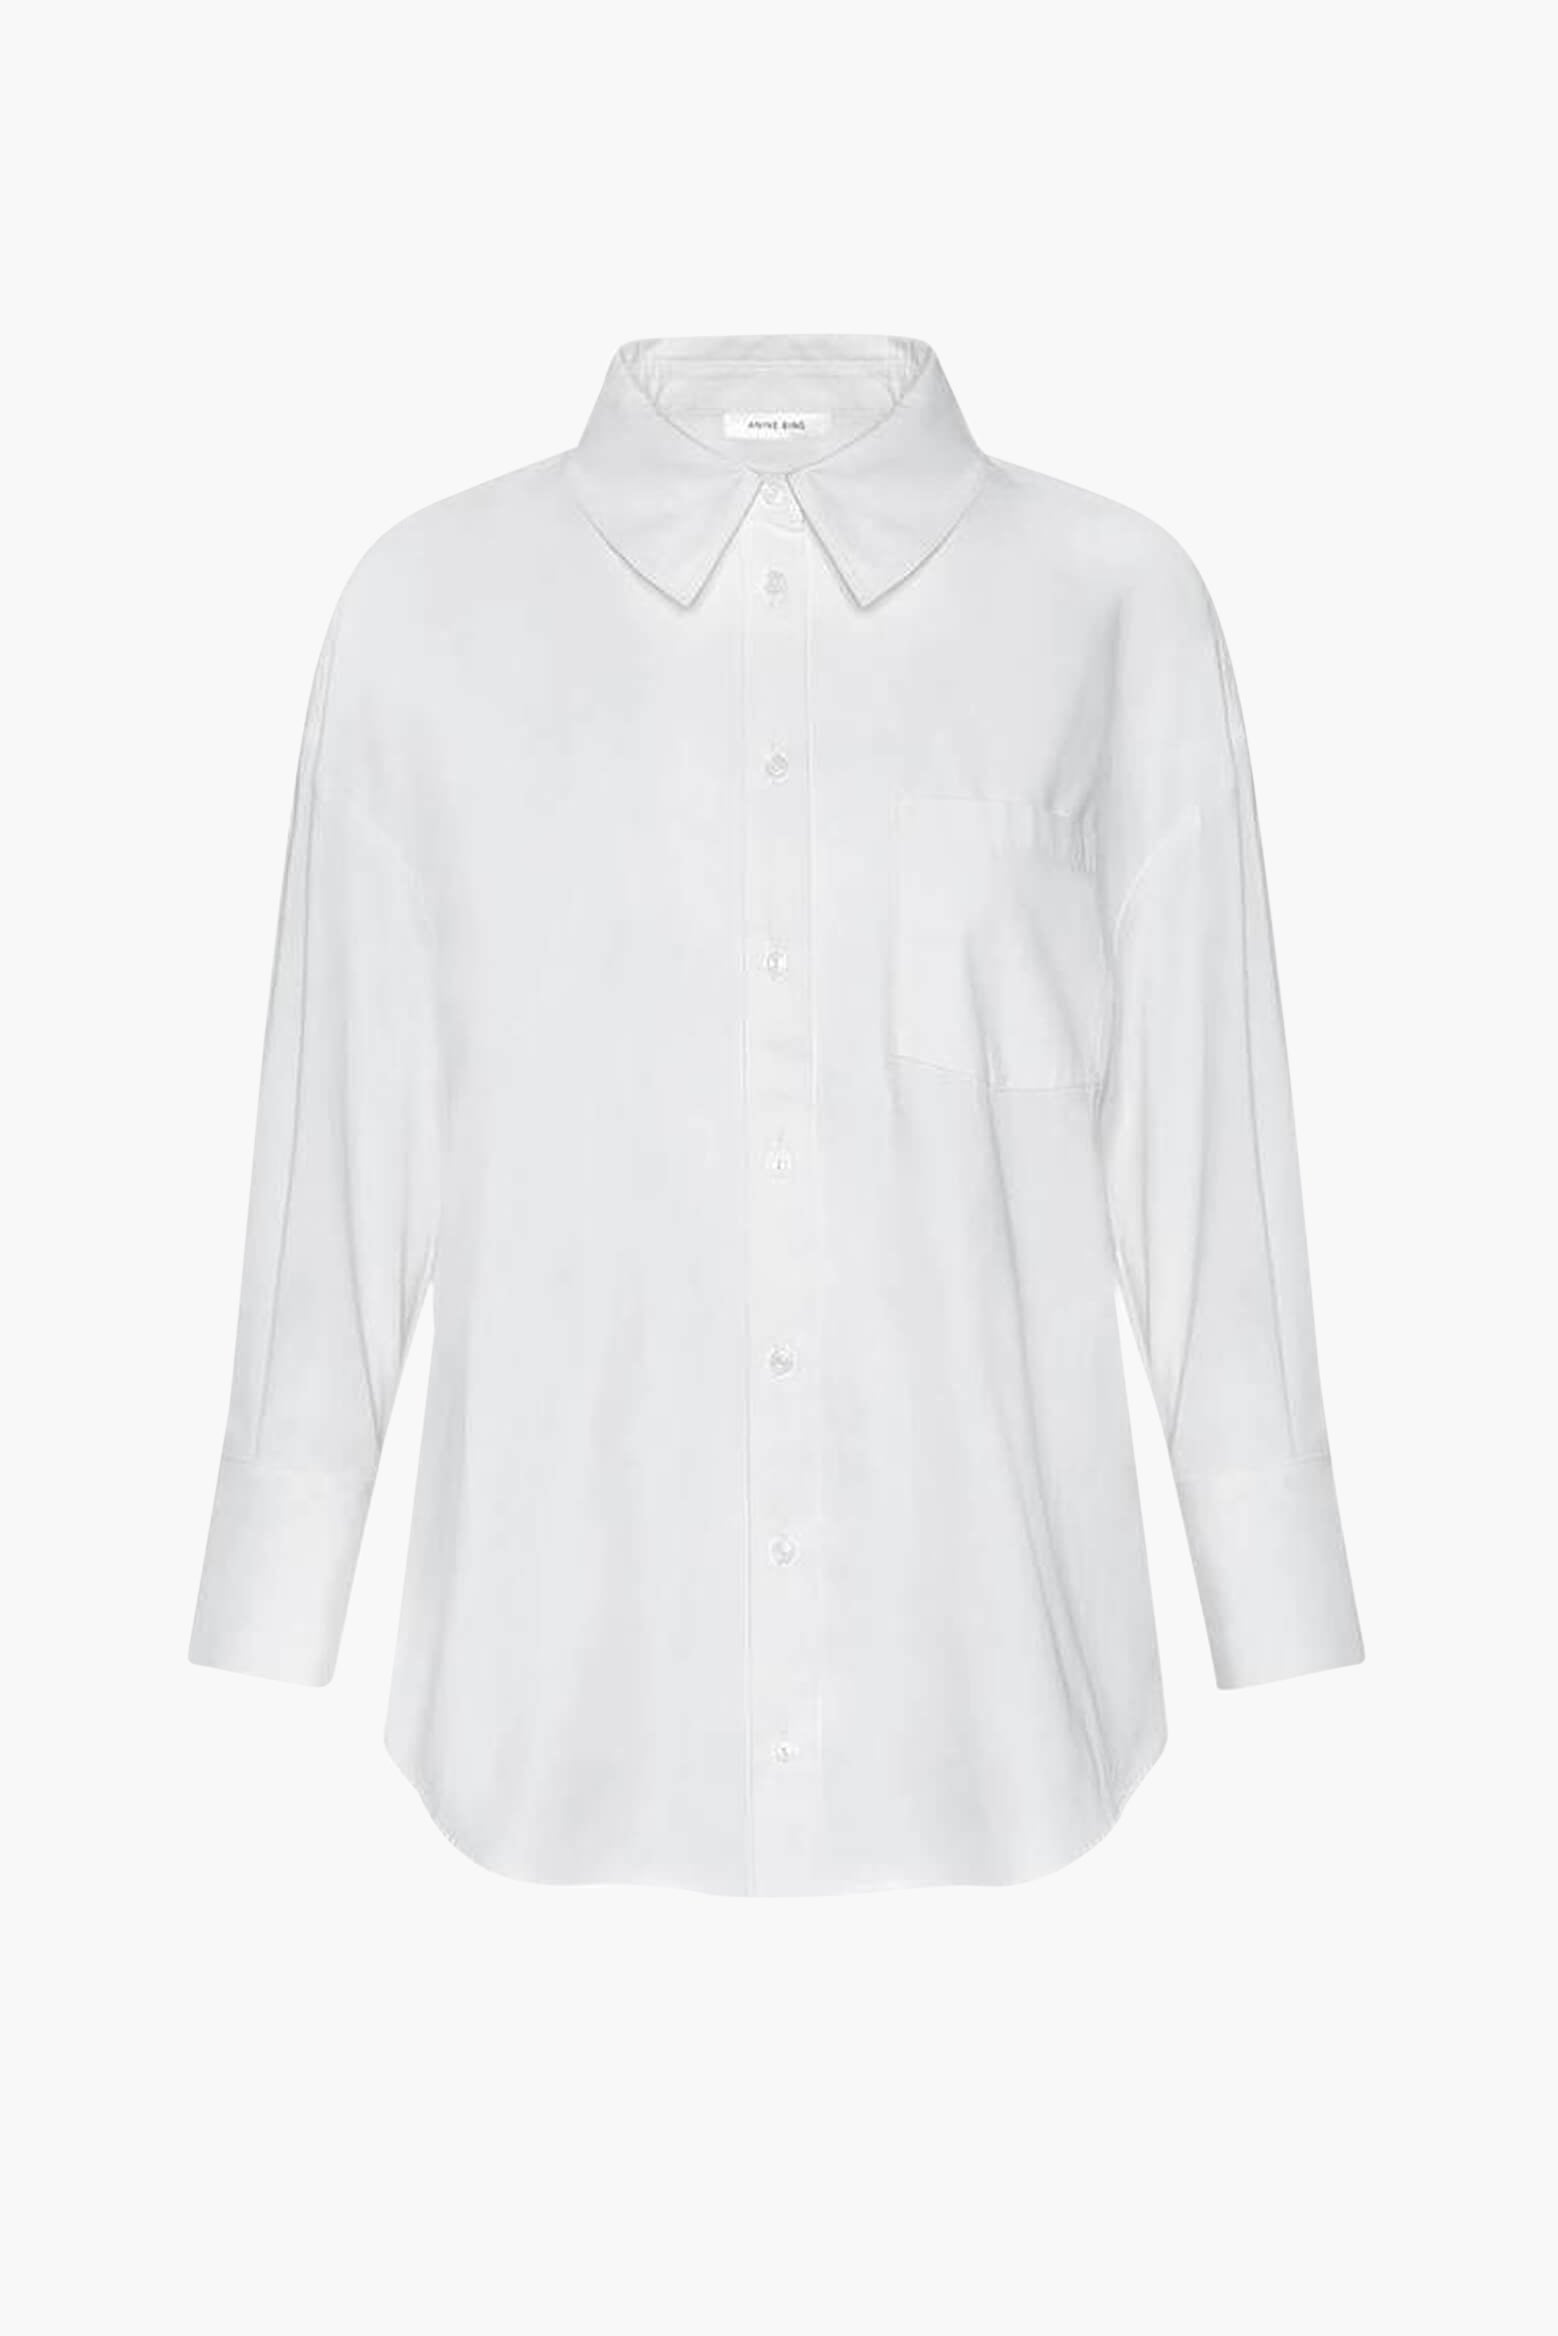 Anine Bing Mika Shirt in White from The New Trend